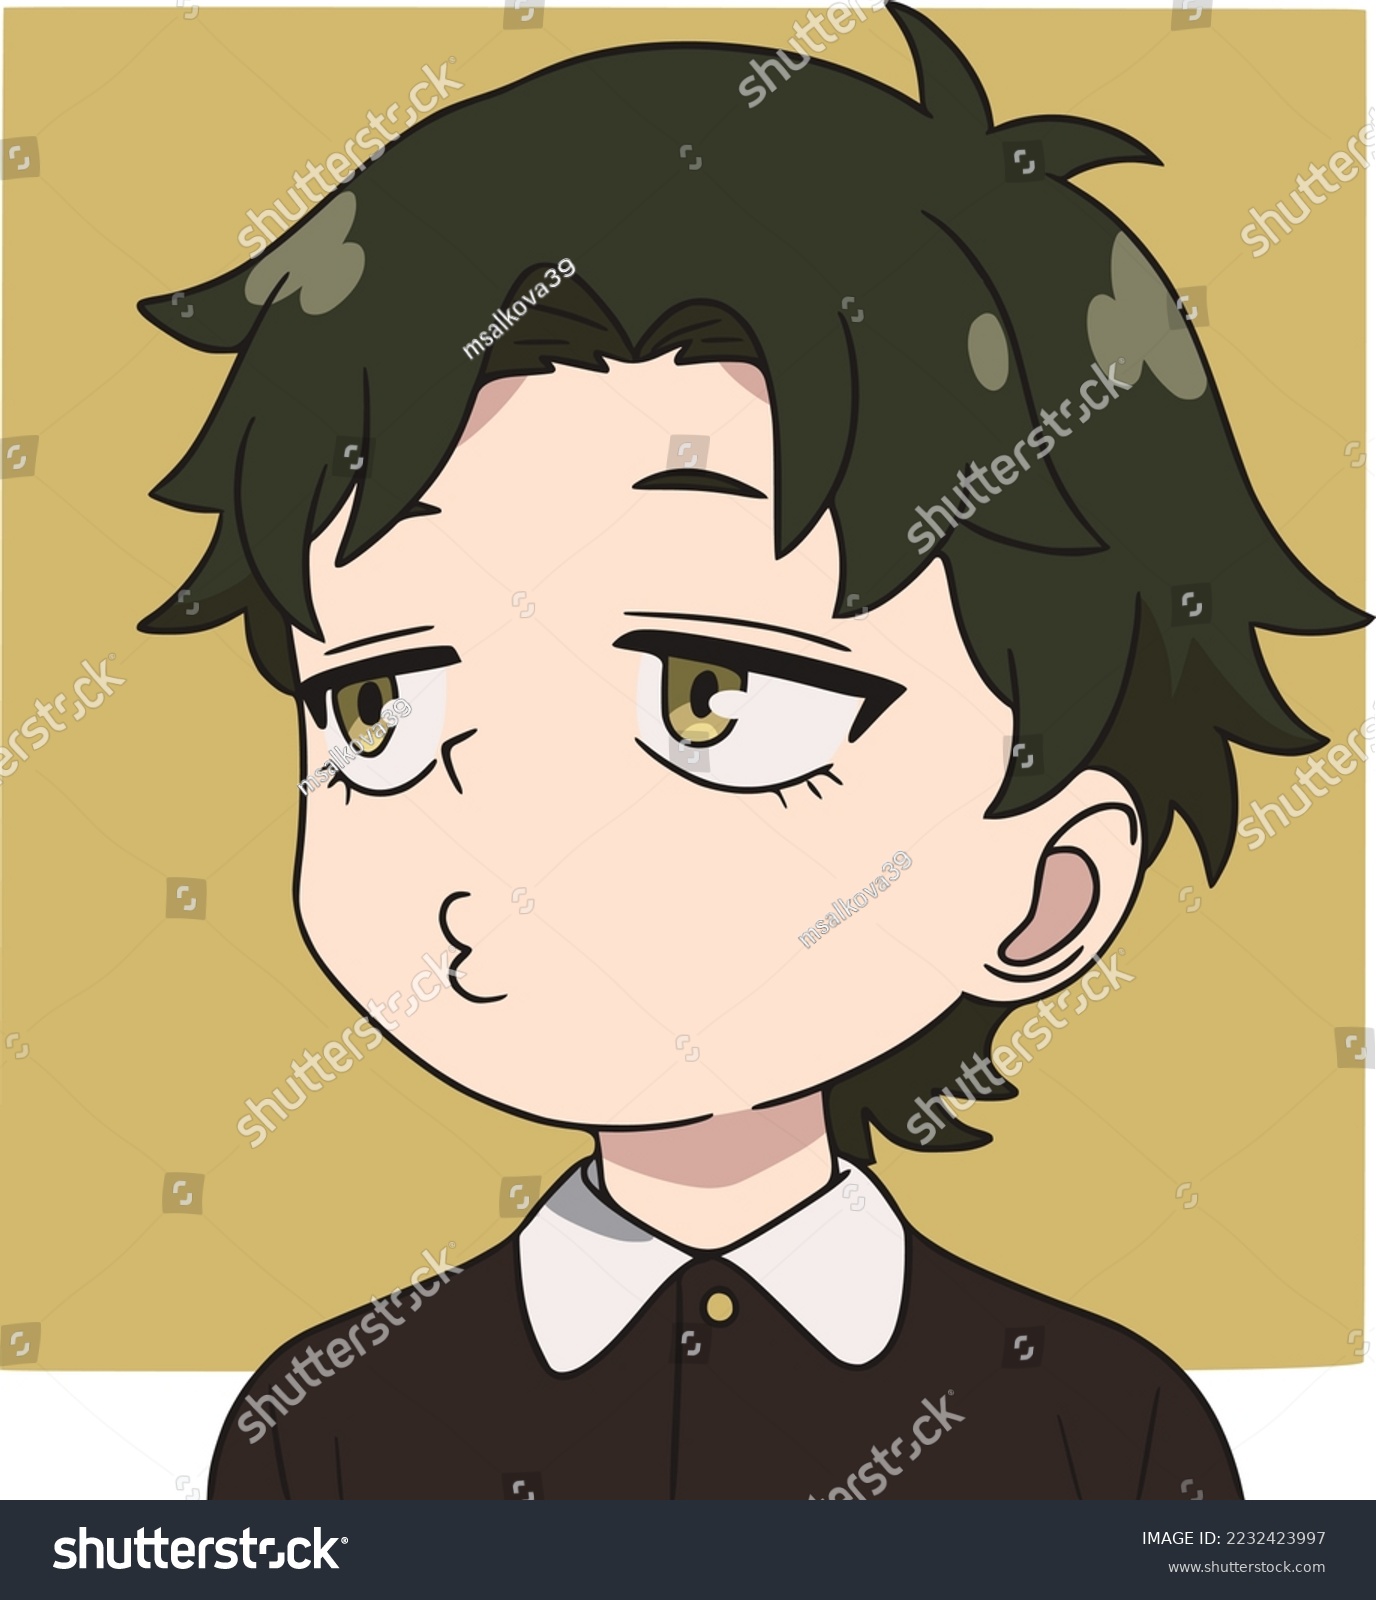 SVG of Boy with green hair and golden eyes, looks to the left, embarrassed, yellow background svg